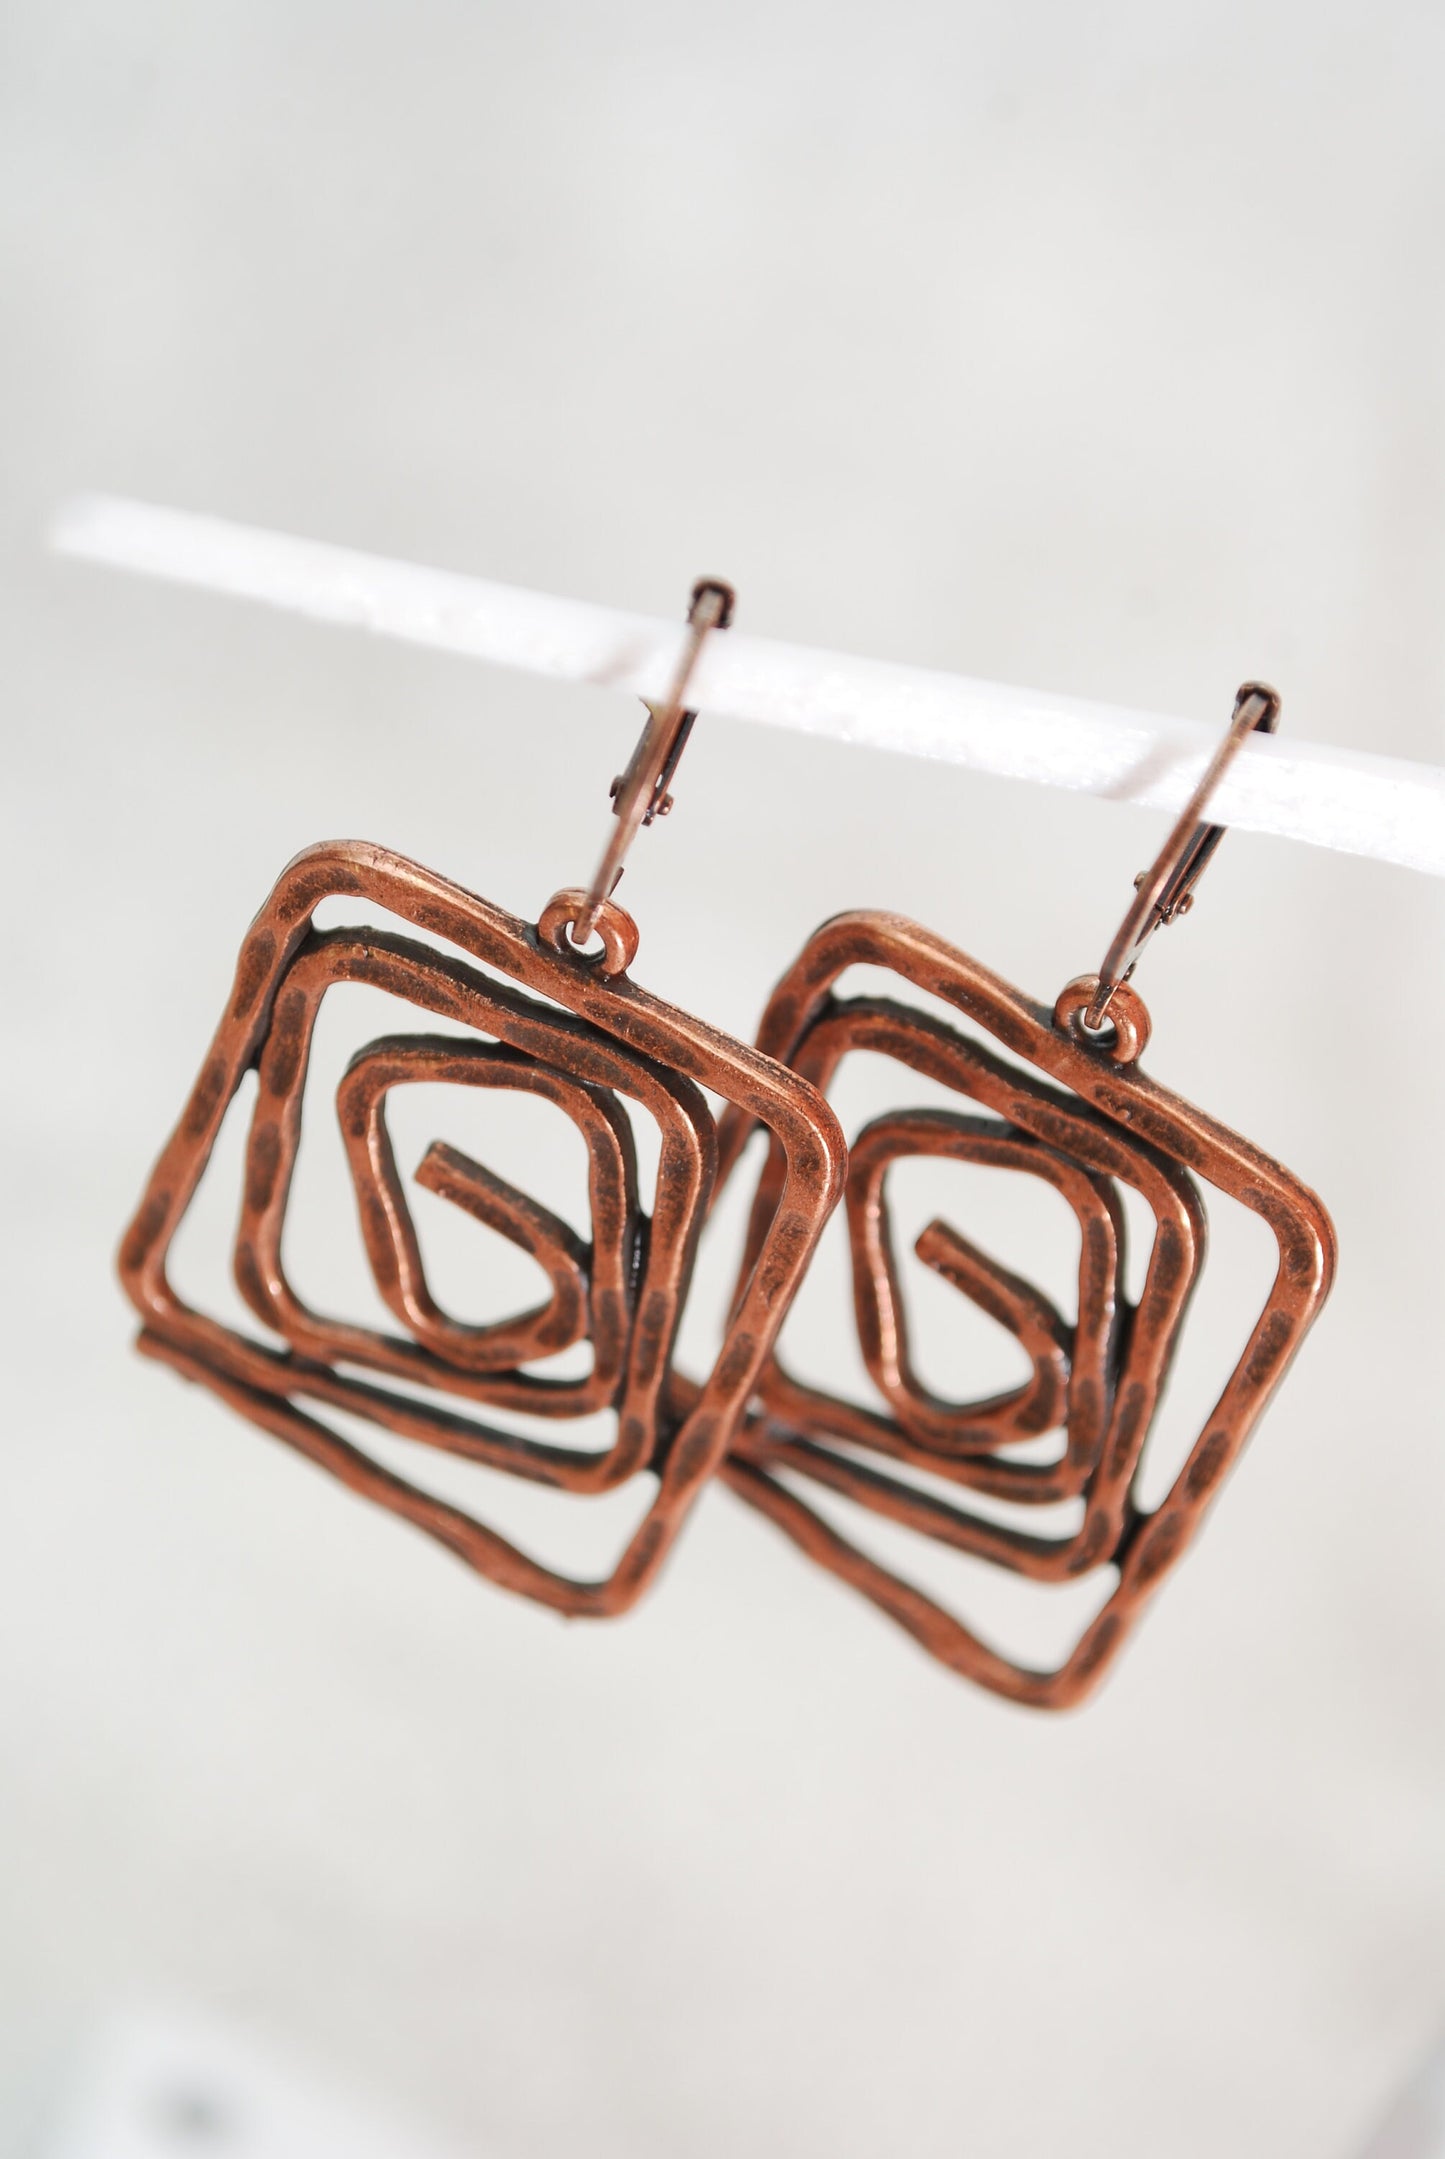 Bohemian-inspired Abstract Earrings with Earthy Tones and Chic Design for Daily and Special Occasions